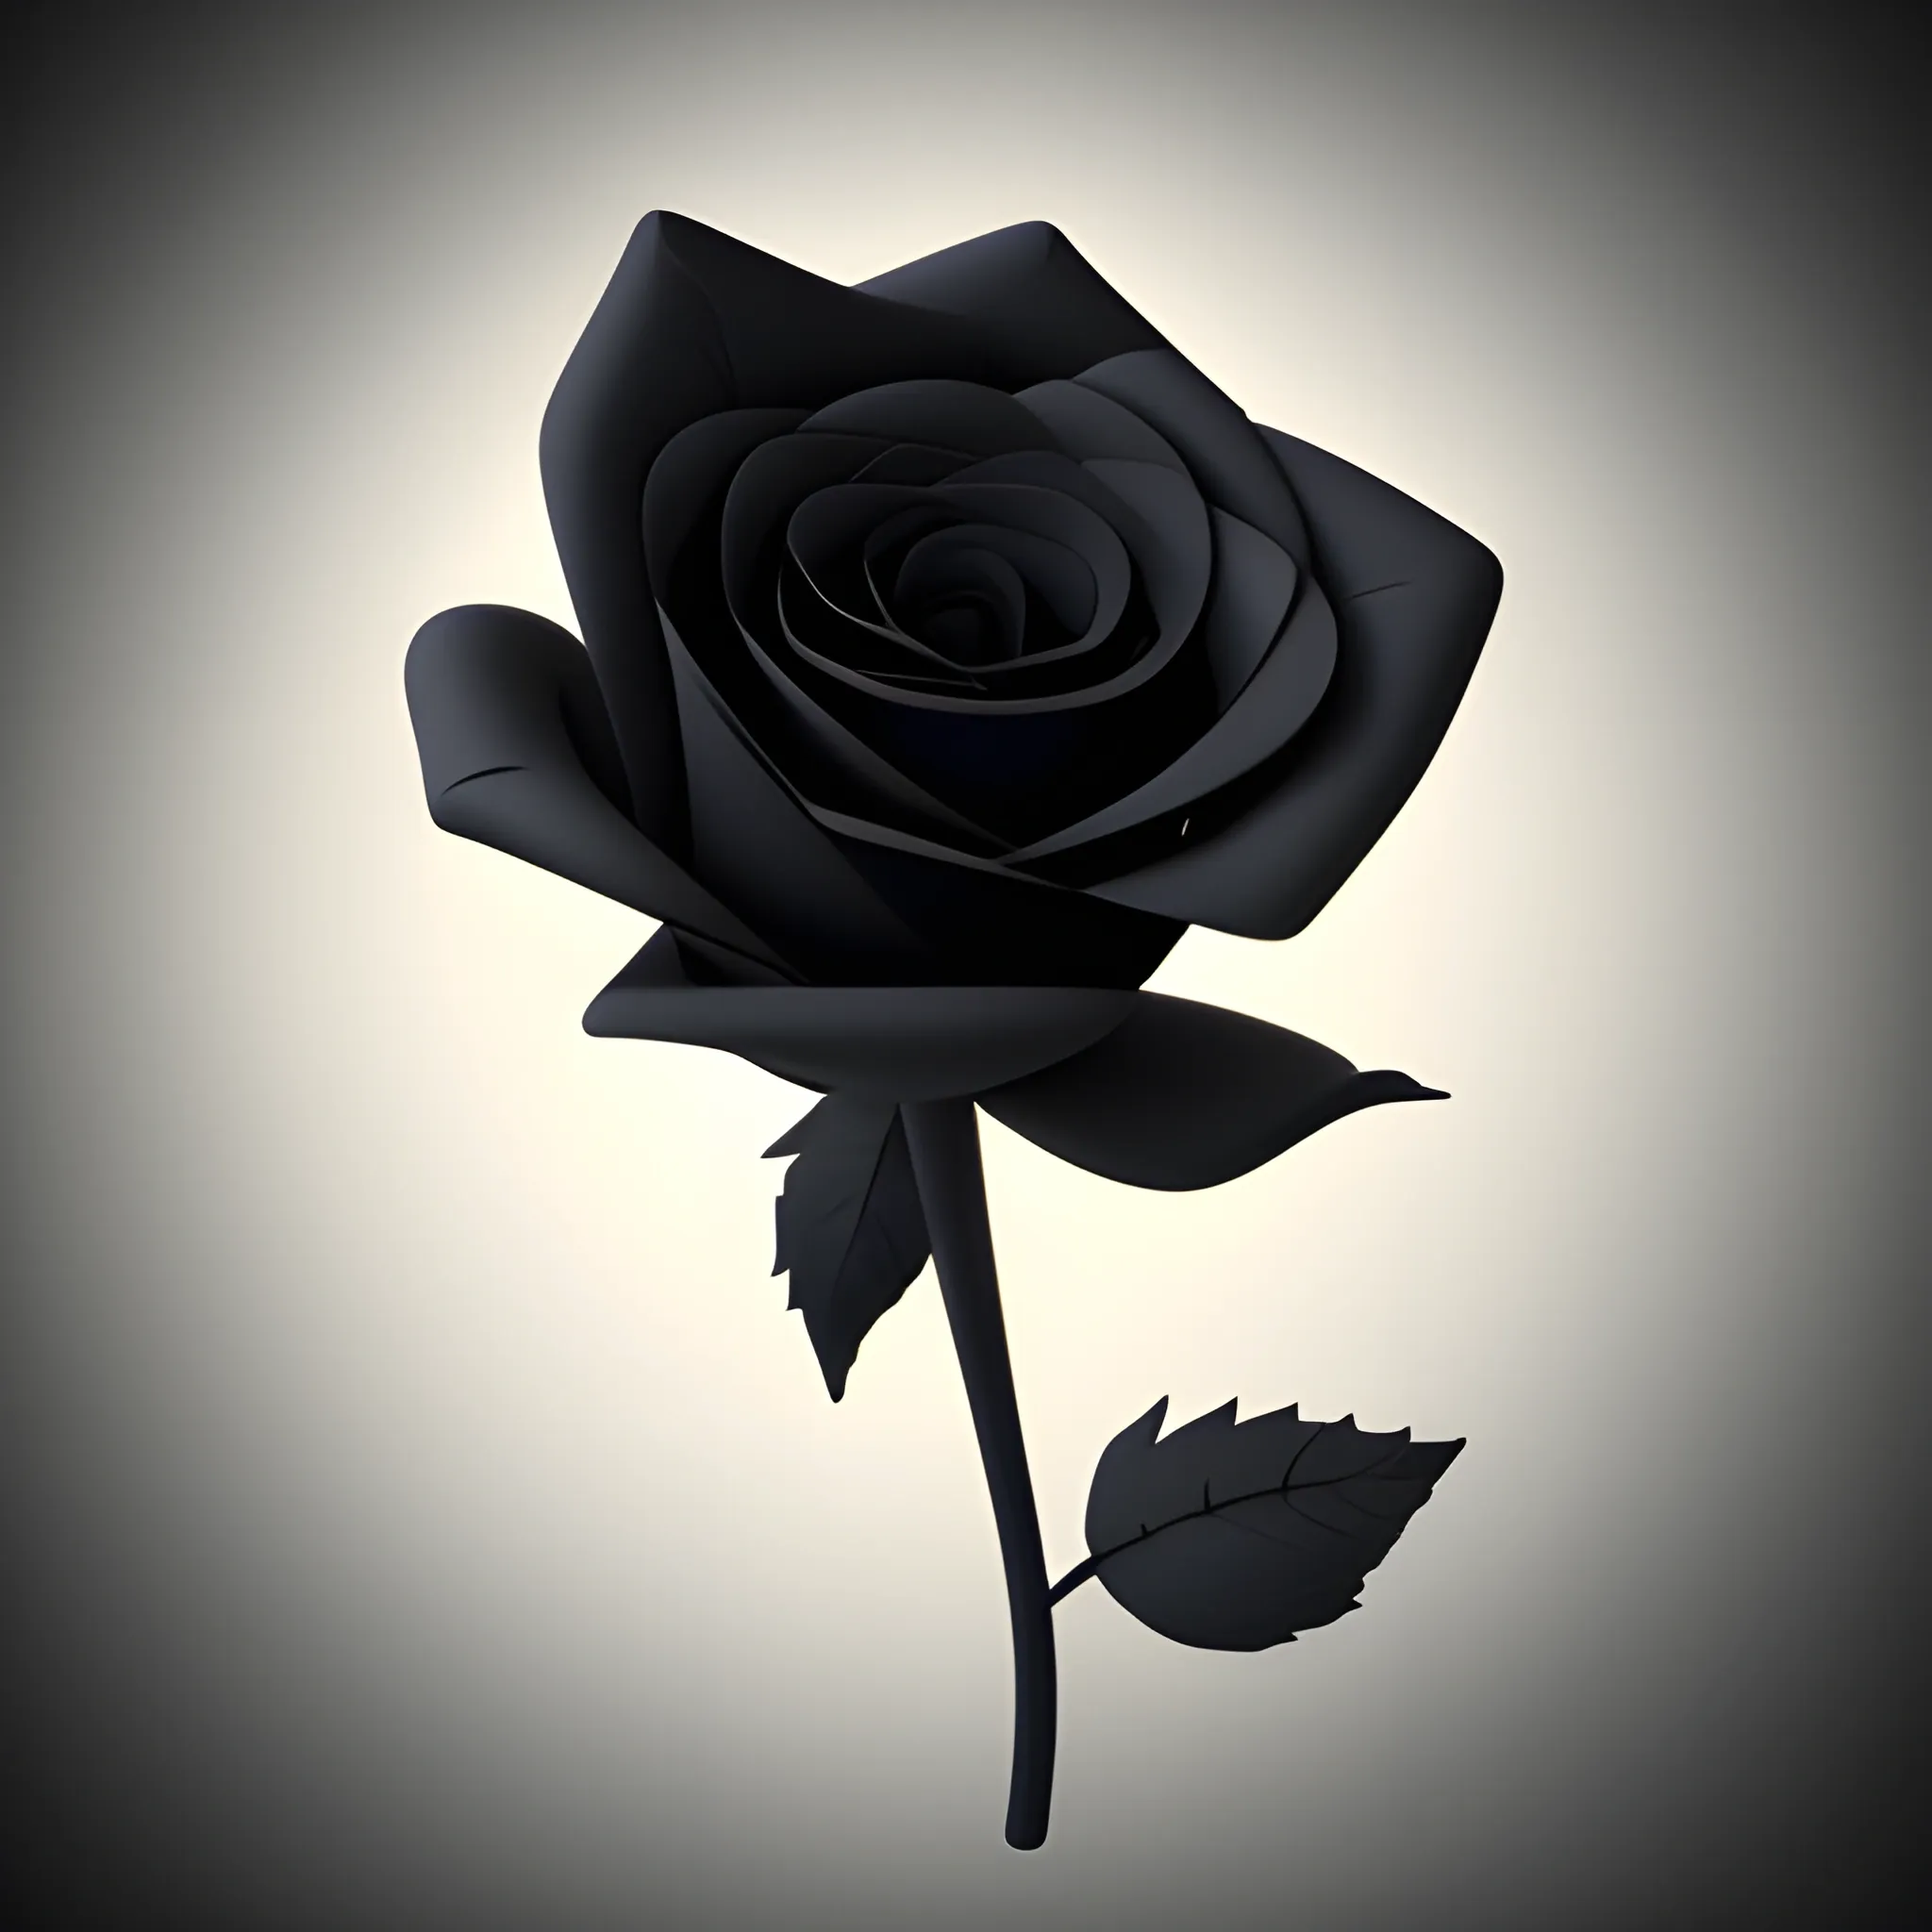 Black rose, background color is mysterious and deep, 3D